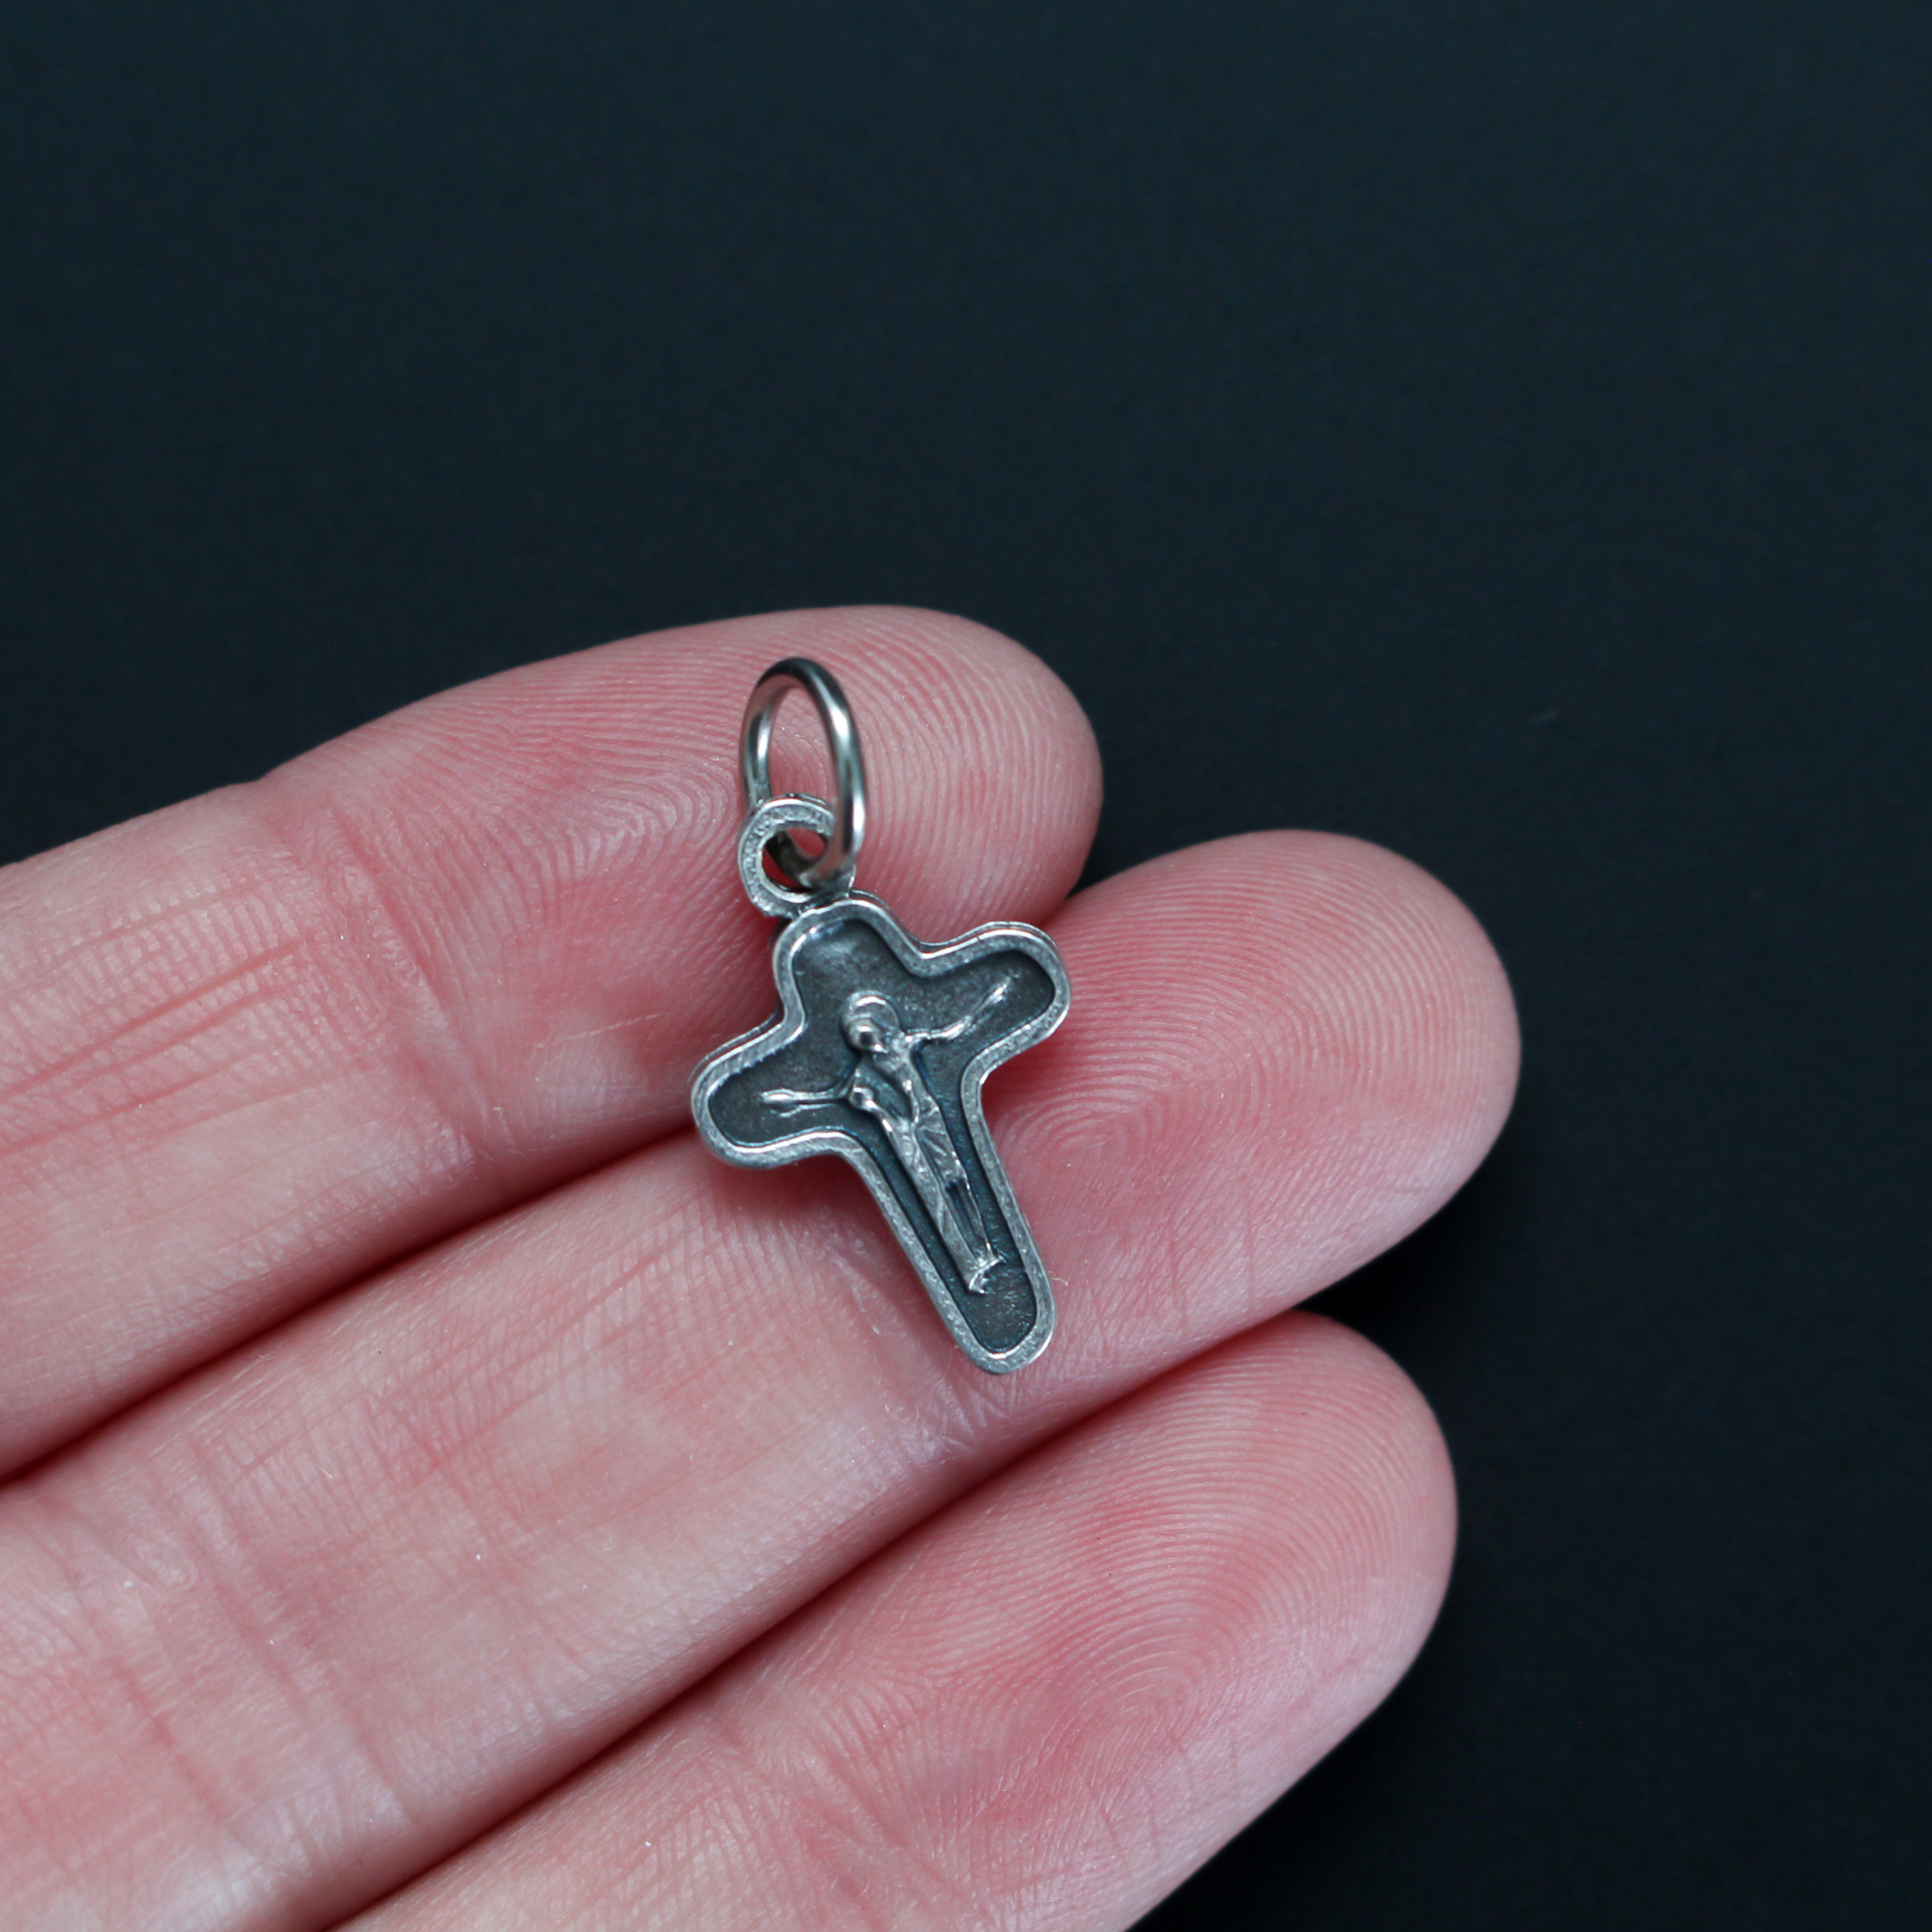 Small bracelet size Crucifixion pendant that depicts Mary at the side of Christ 3/4" long